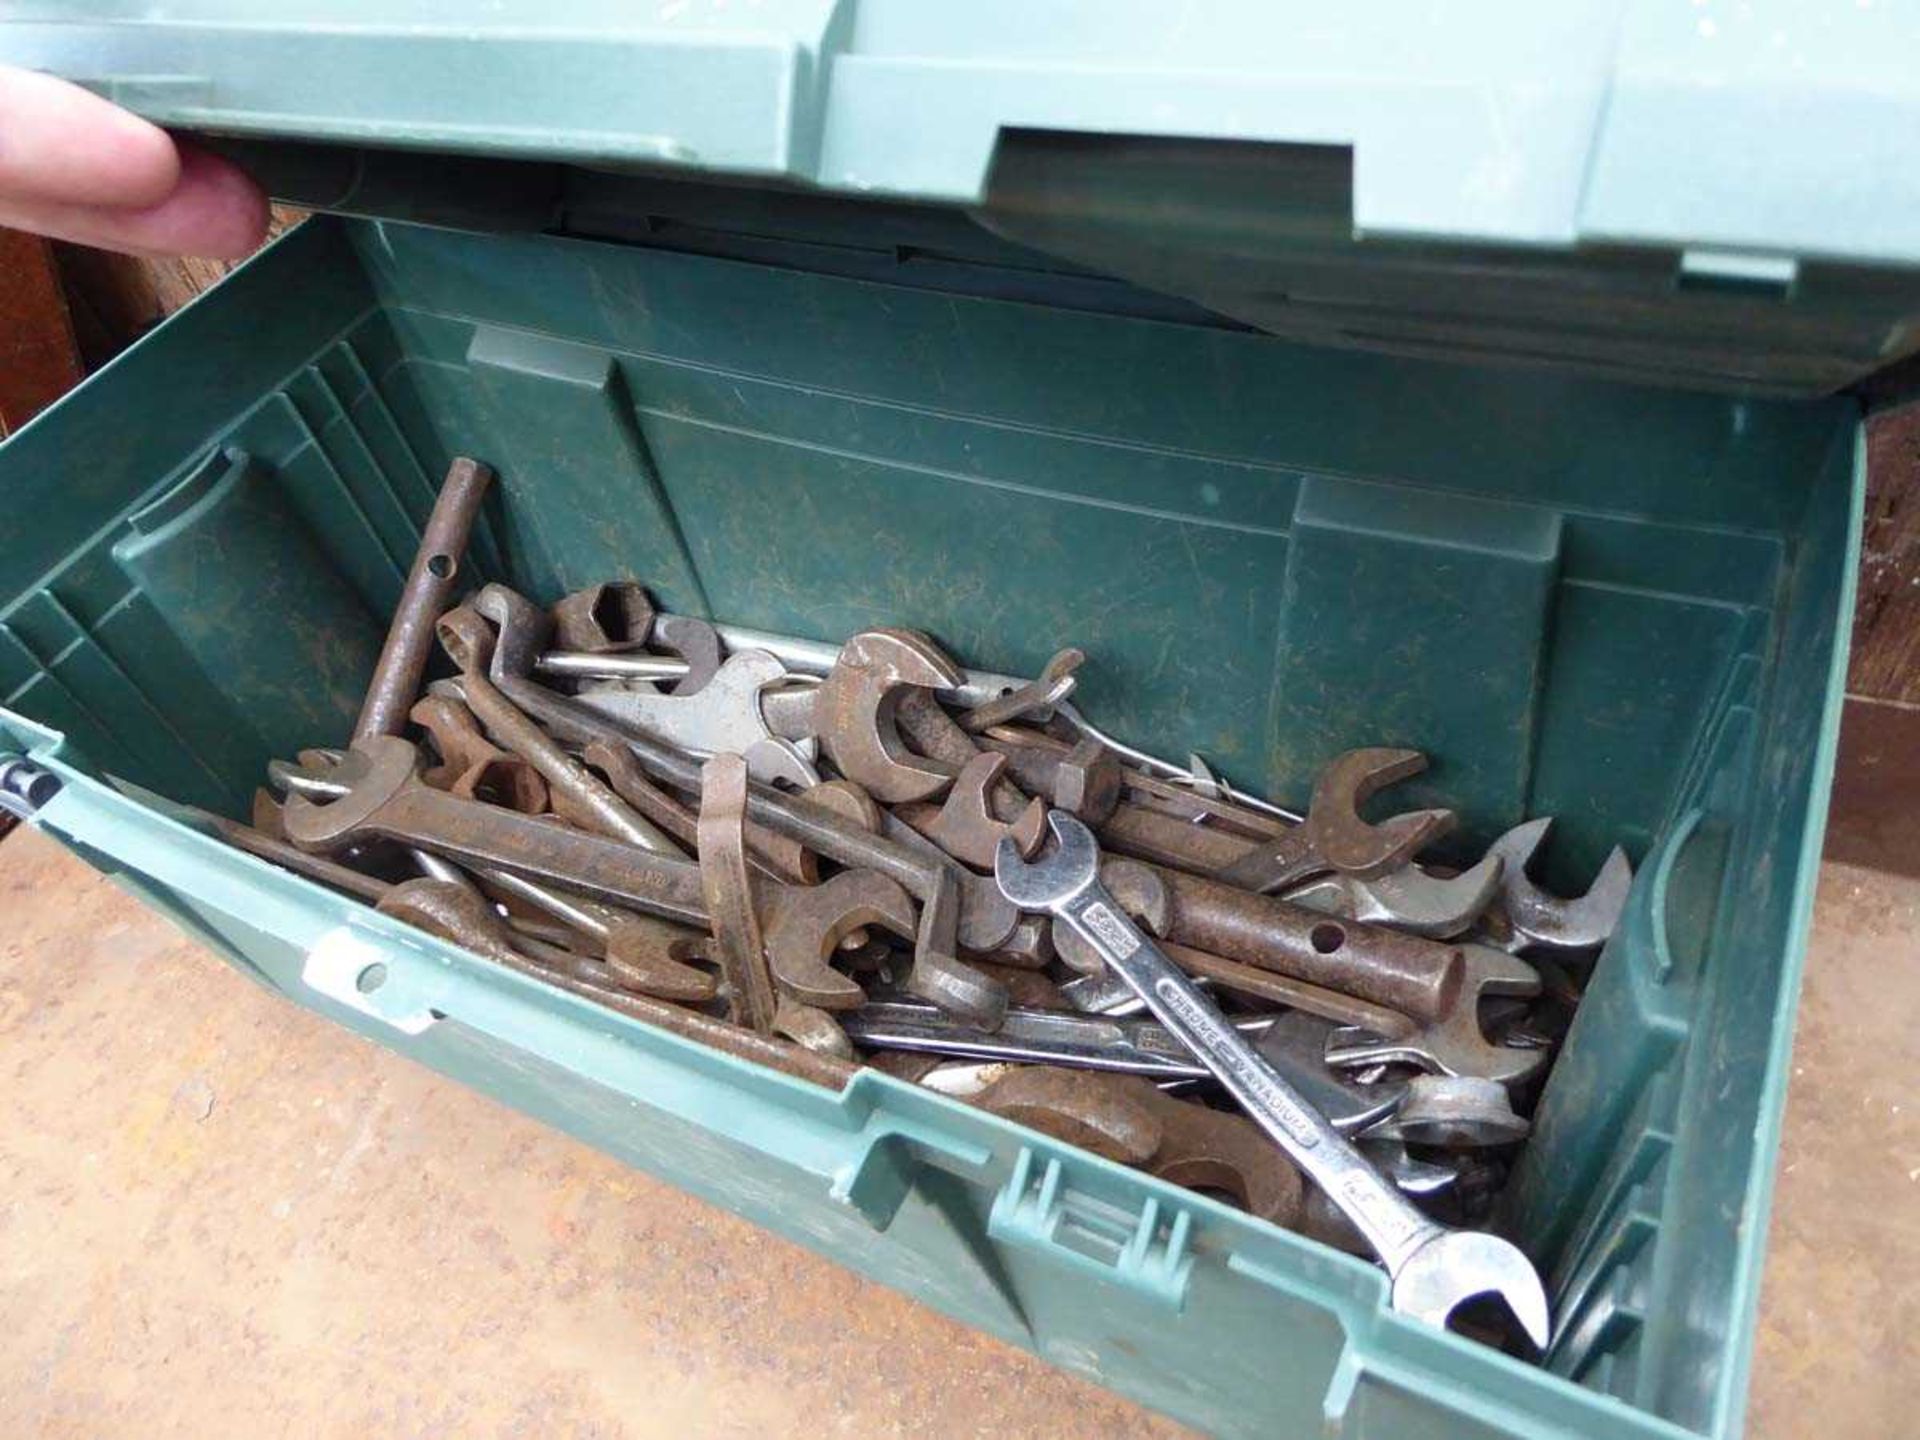 Green plastic tool box with various spanners